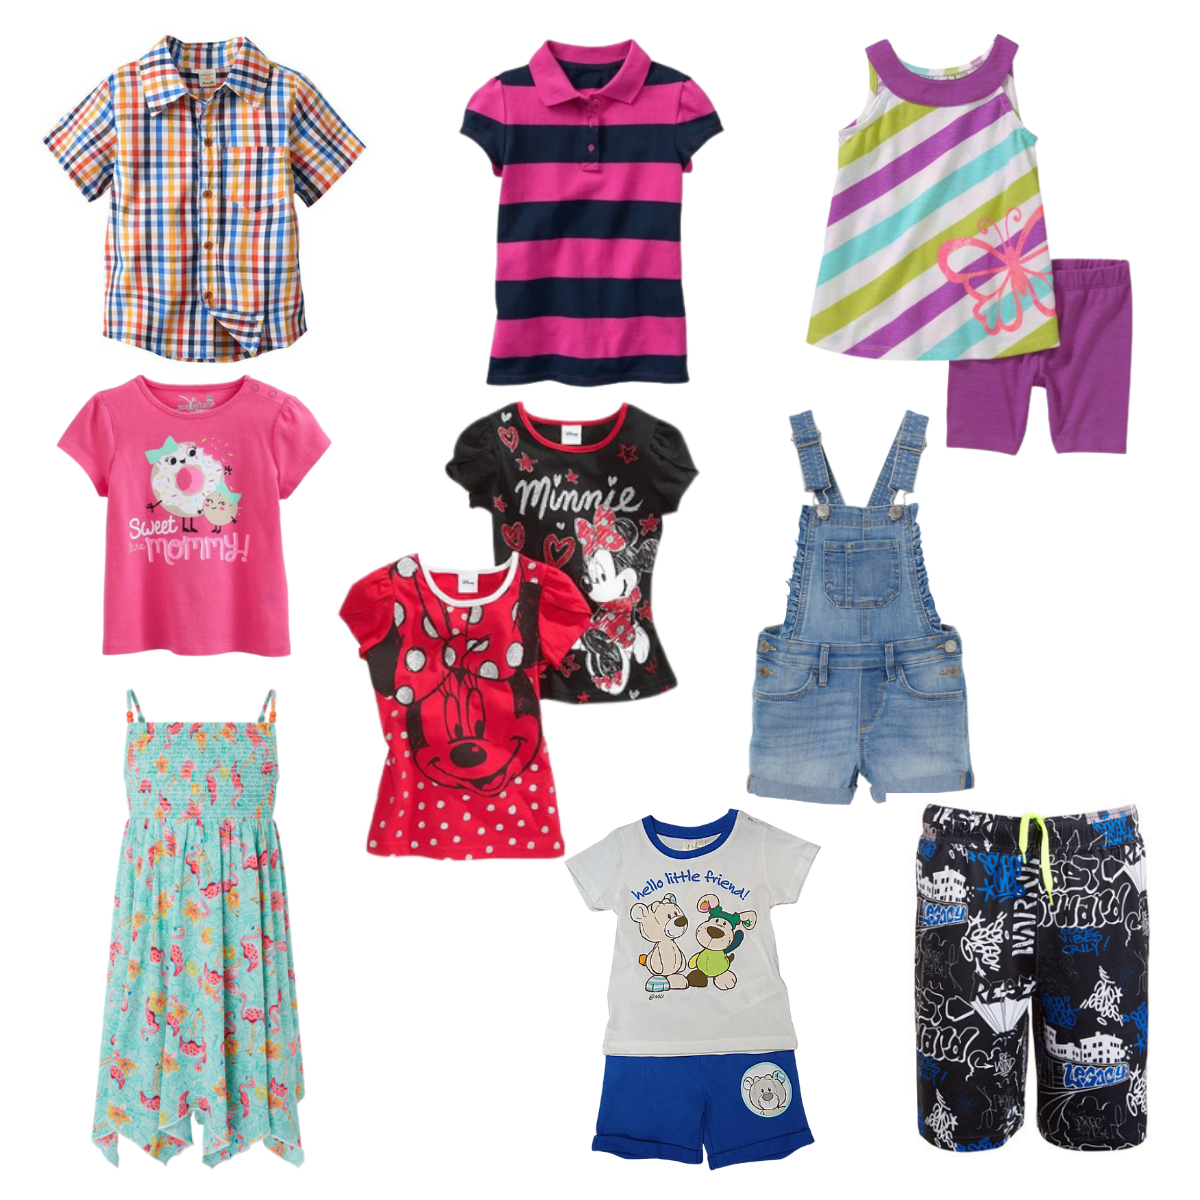 SPRING/ SUMMER SAMPLE MIX, WHOLESALE KIDS CLOTHES PARCEL OF 100 ITEMS